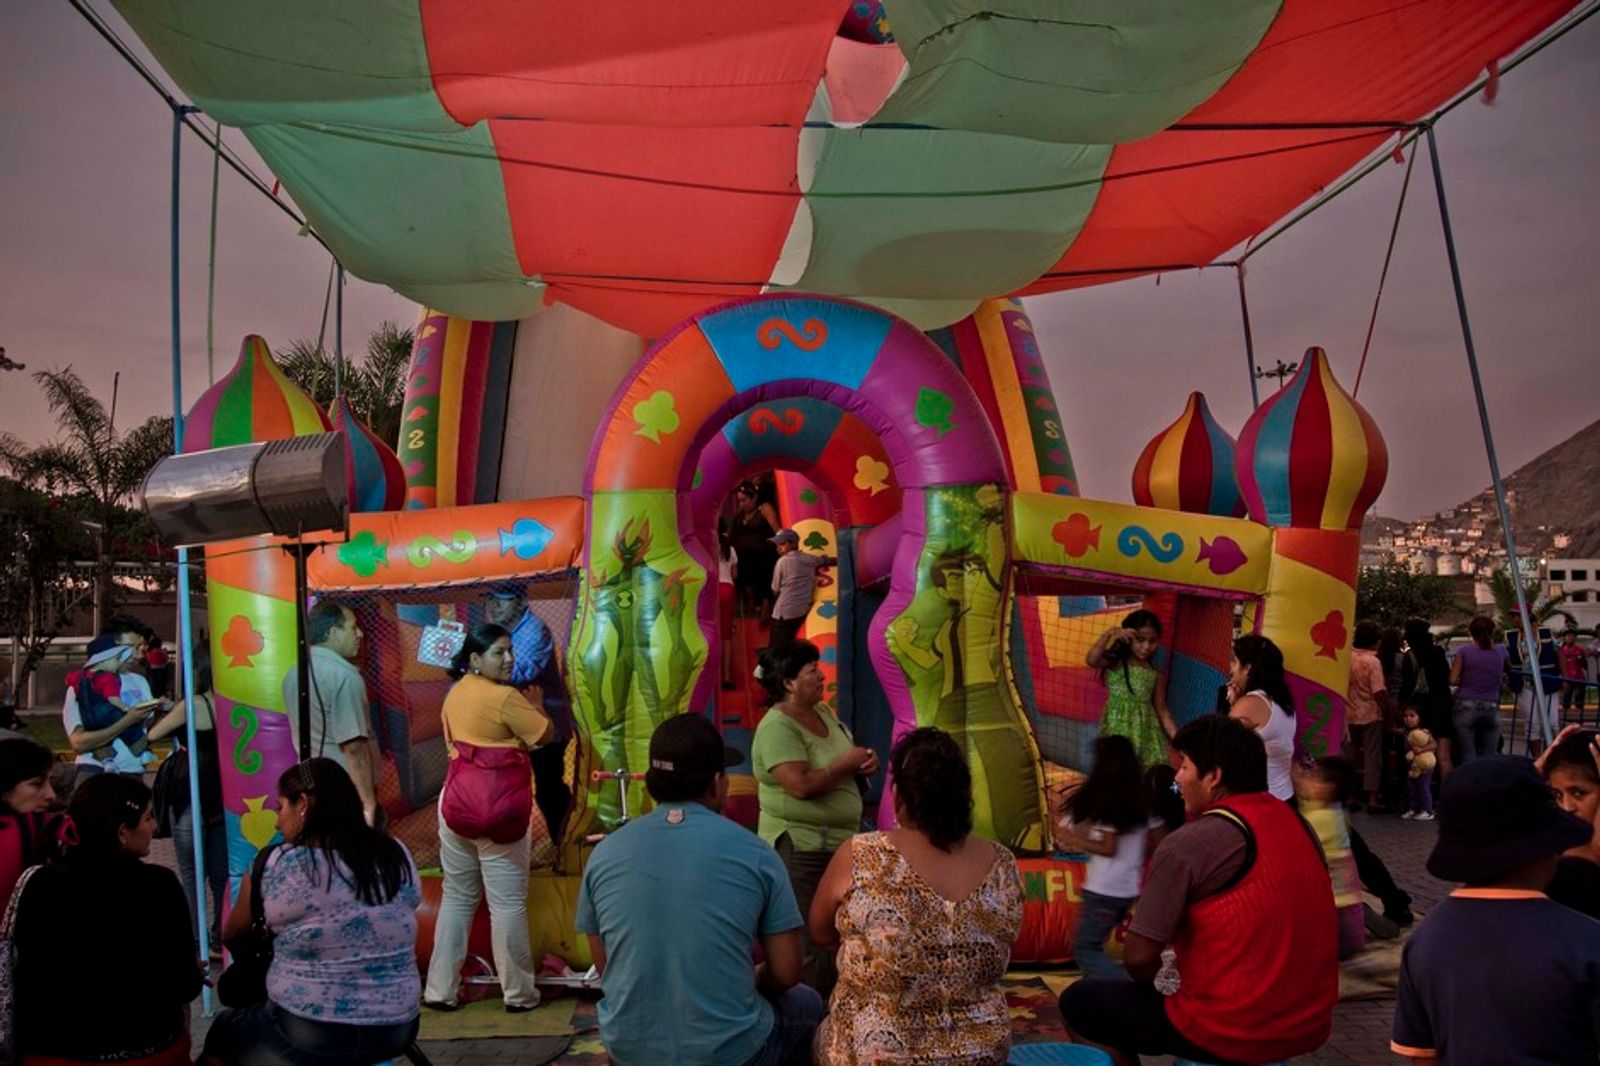 © Max Cabello Orcasitas - Parents wait for their children while they have fun in a inflatable slide. Lima.